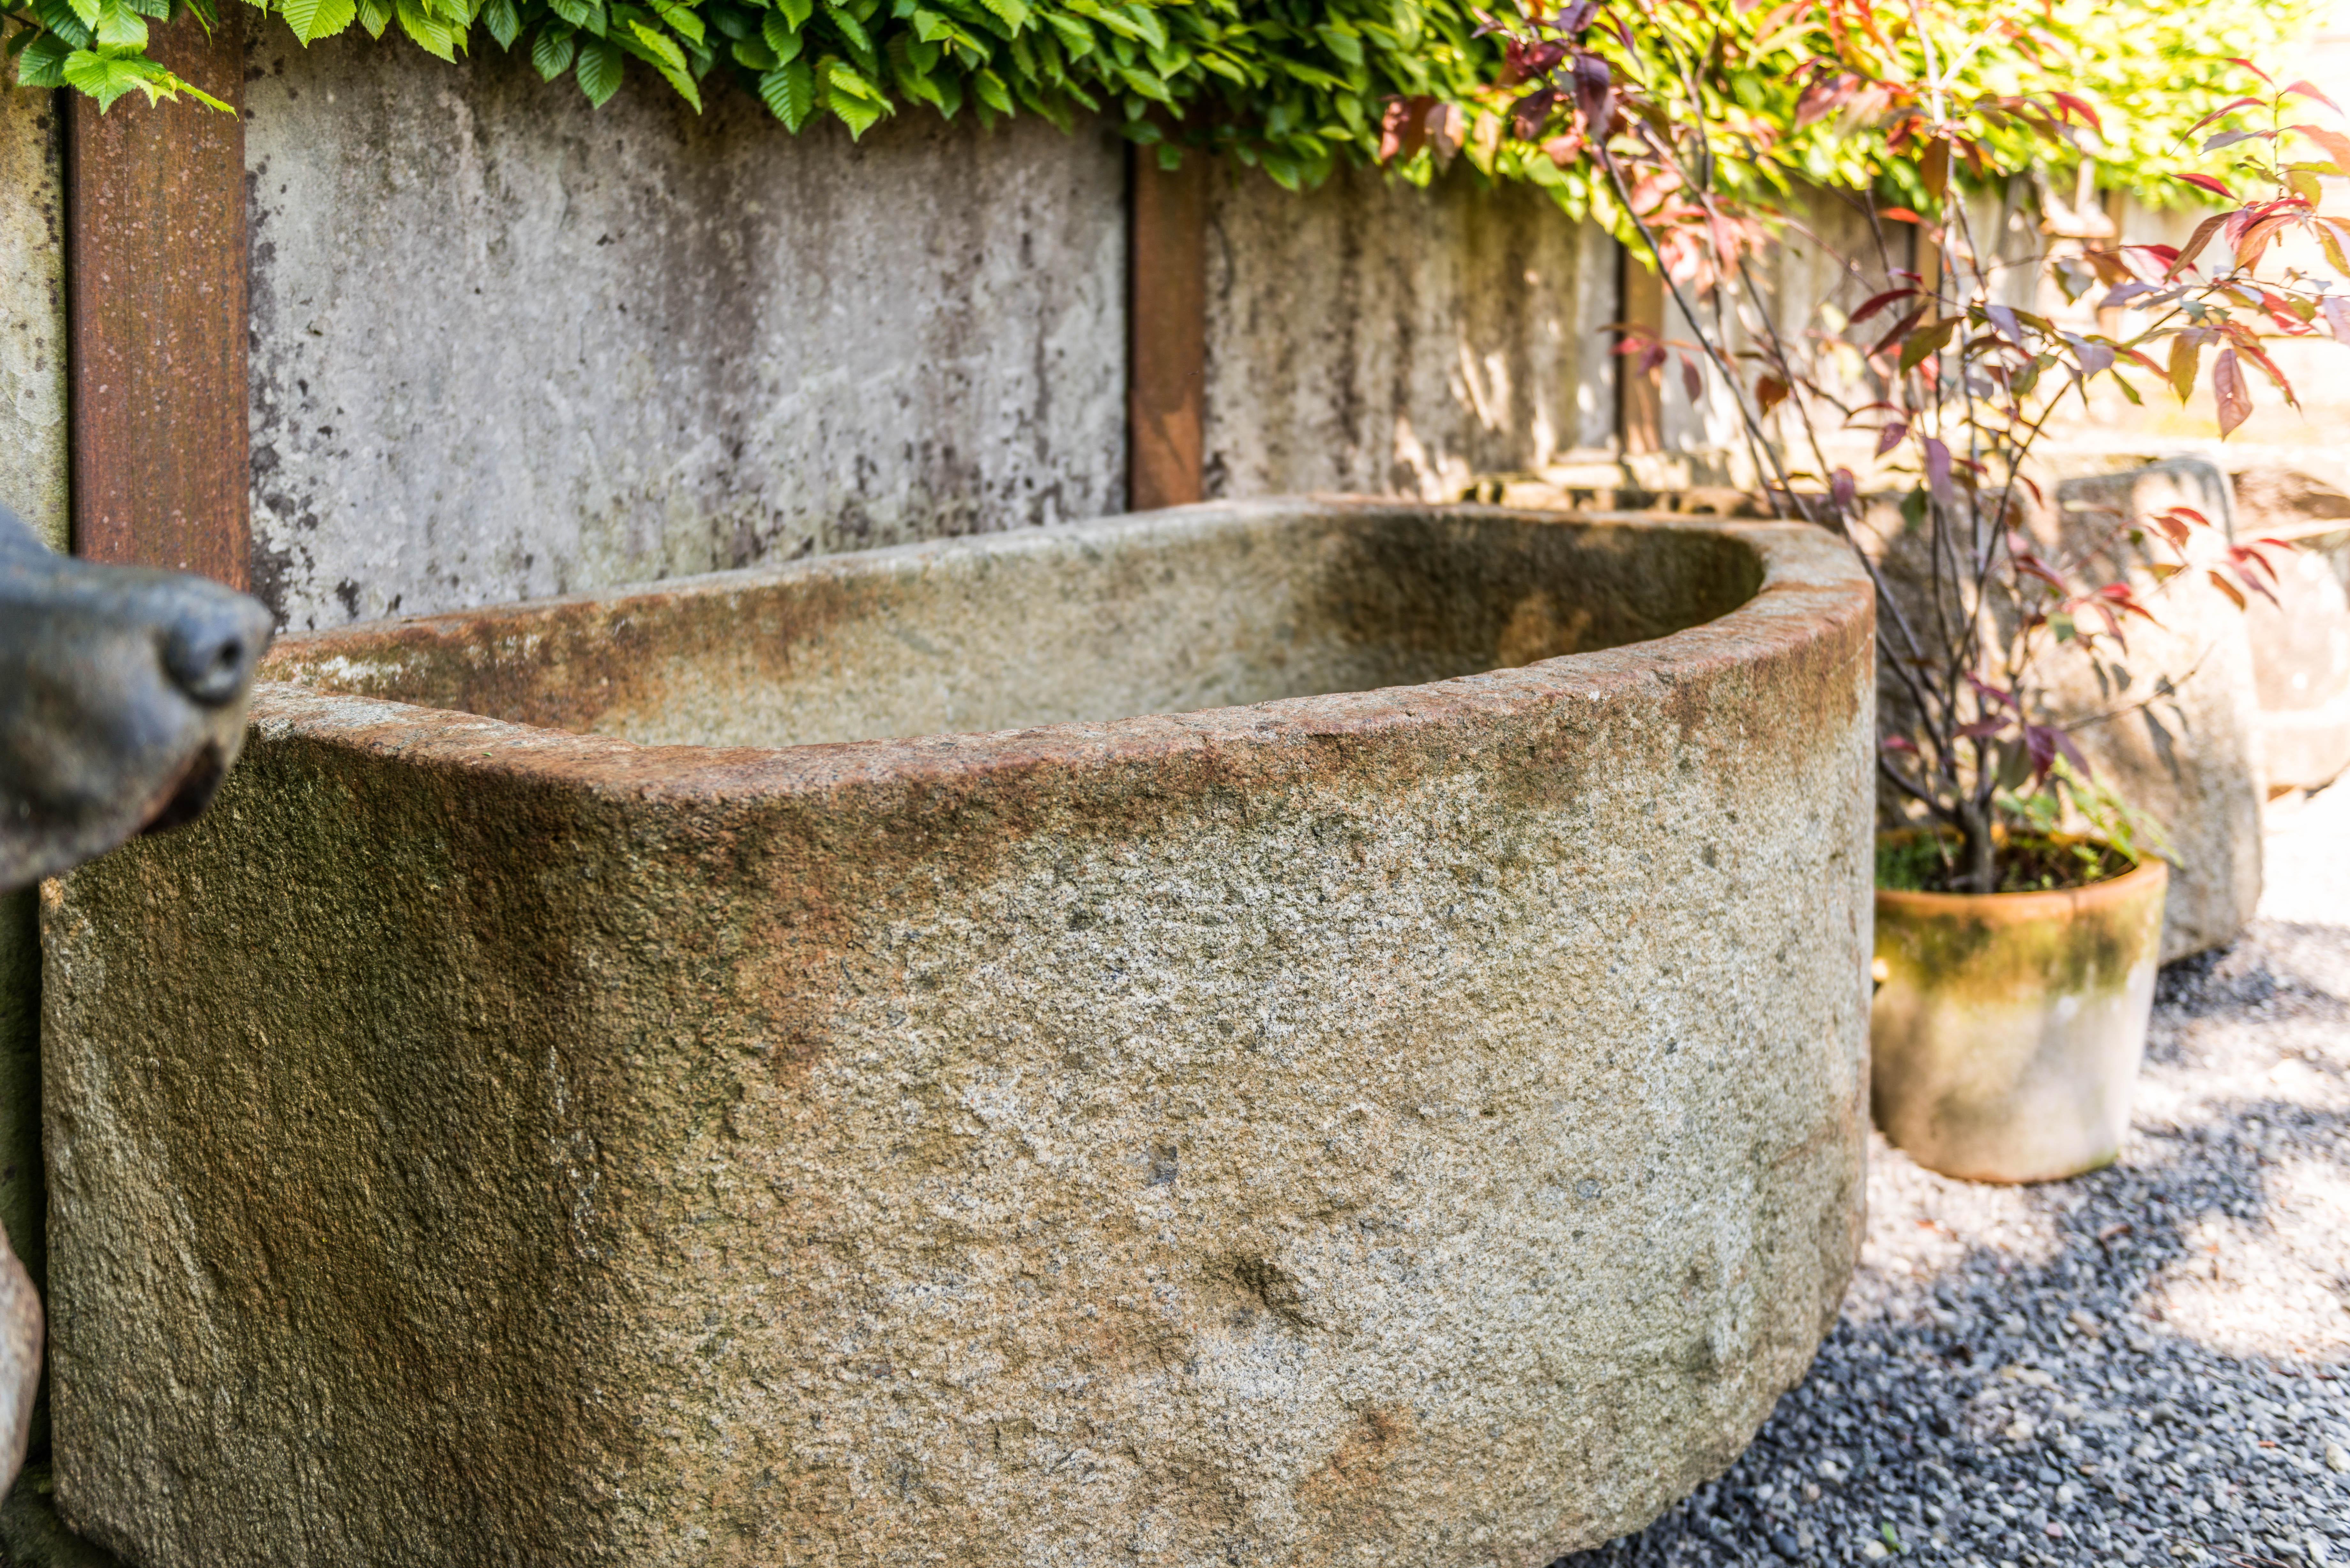 This granite well can be used to put on a wall. The well is in a nice shape and in a good condition. 
The well looks nice in a garden or also in a small town. The place of origin is in France.